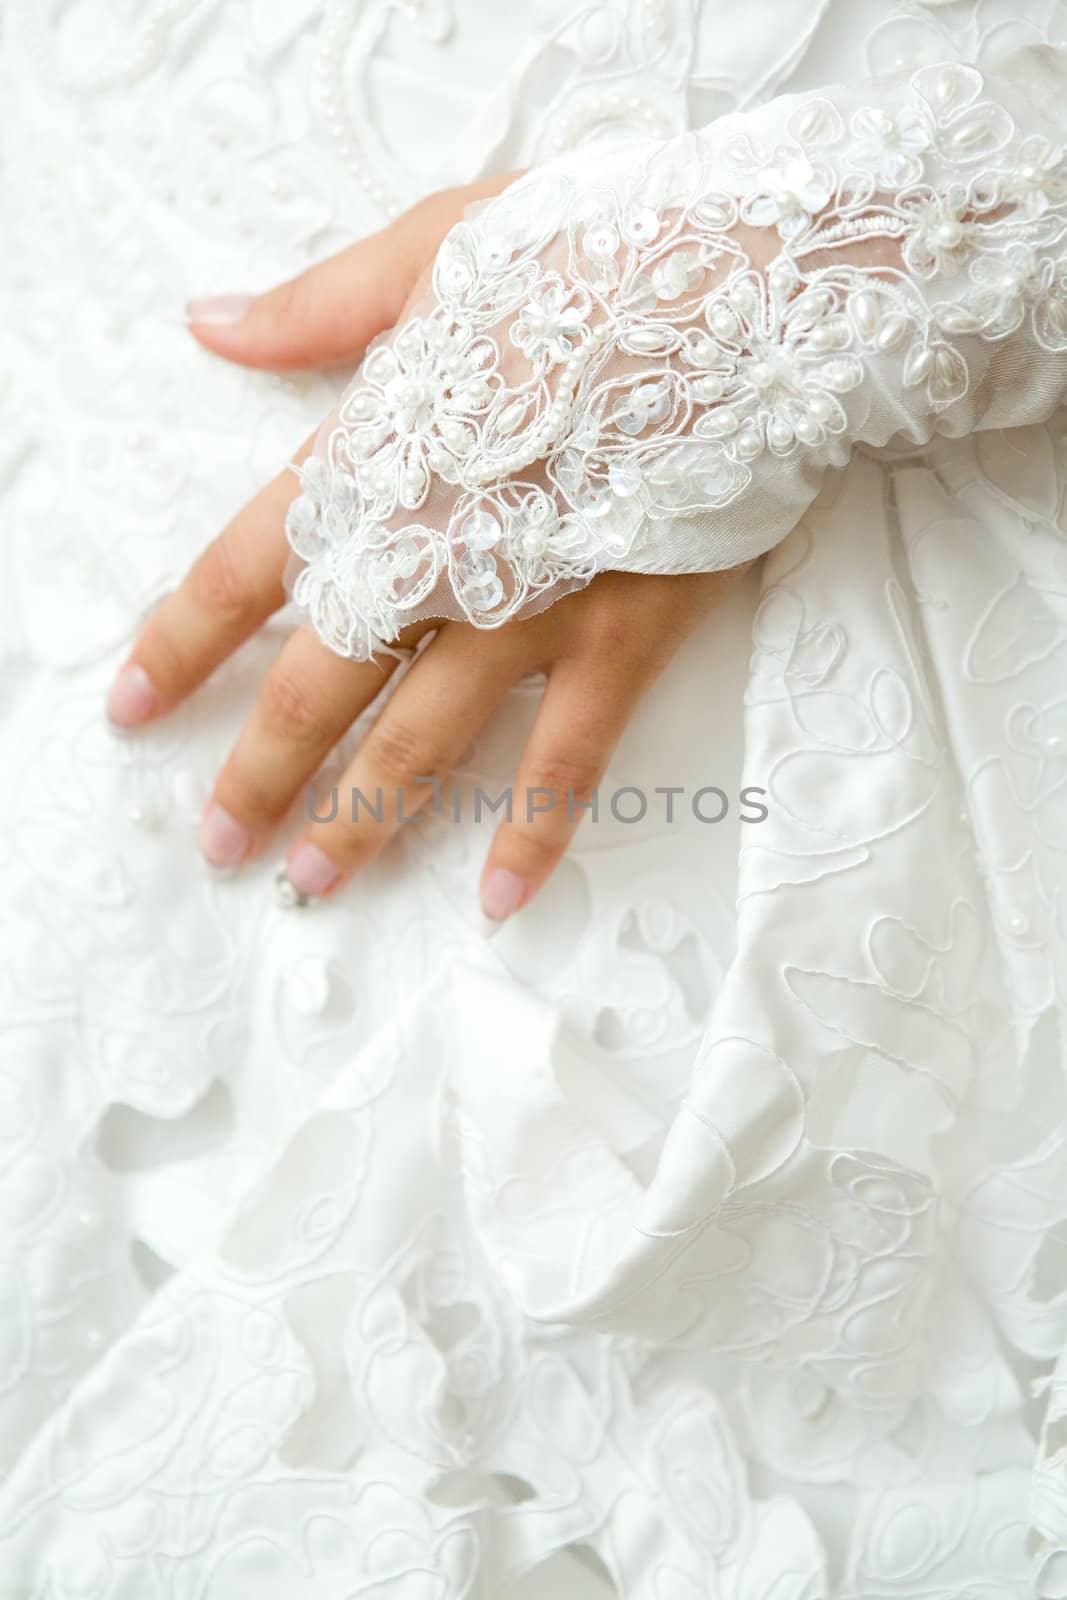 hand in glove of the bride